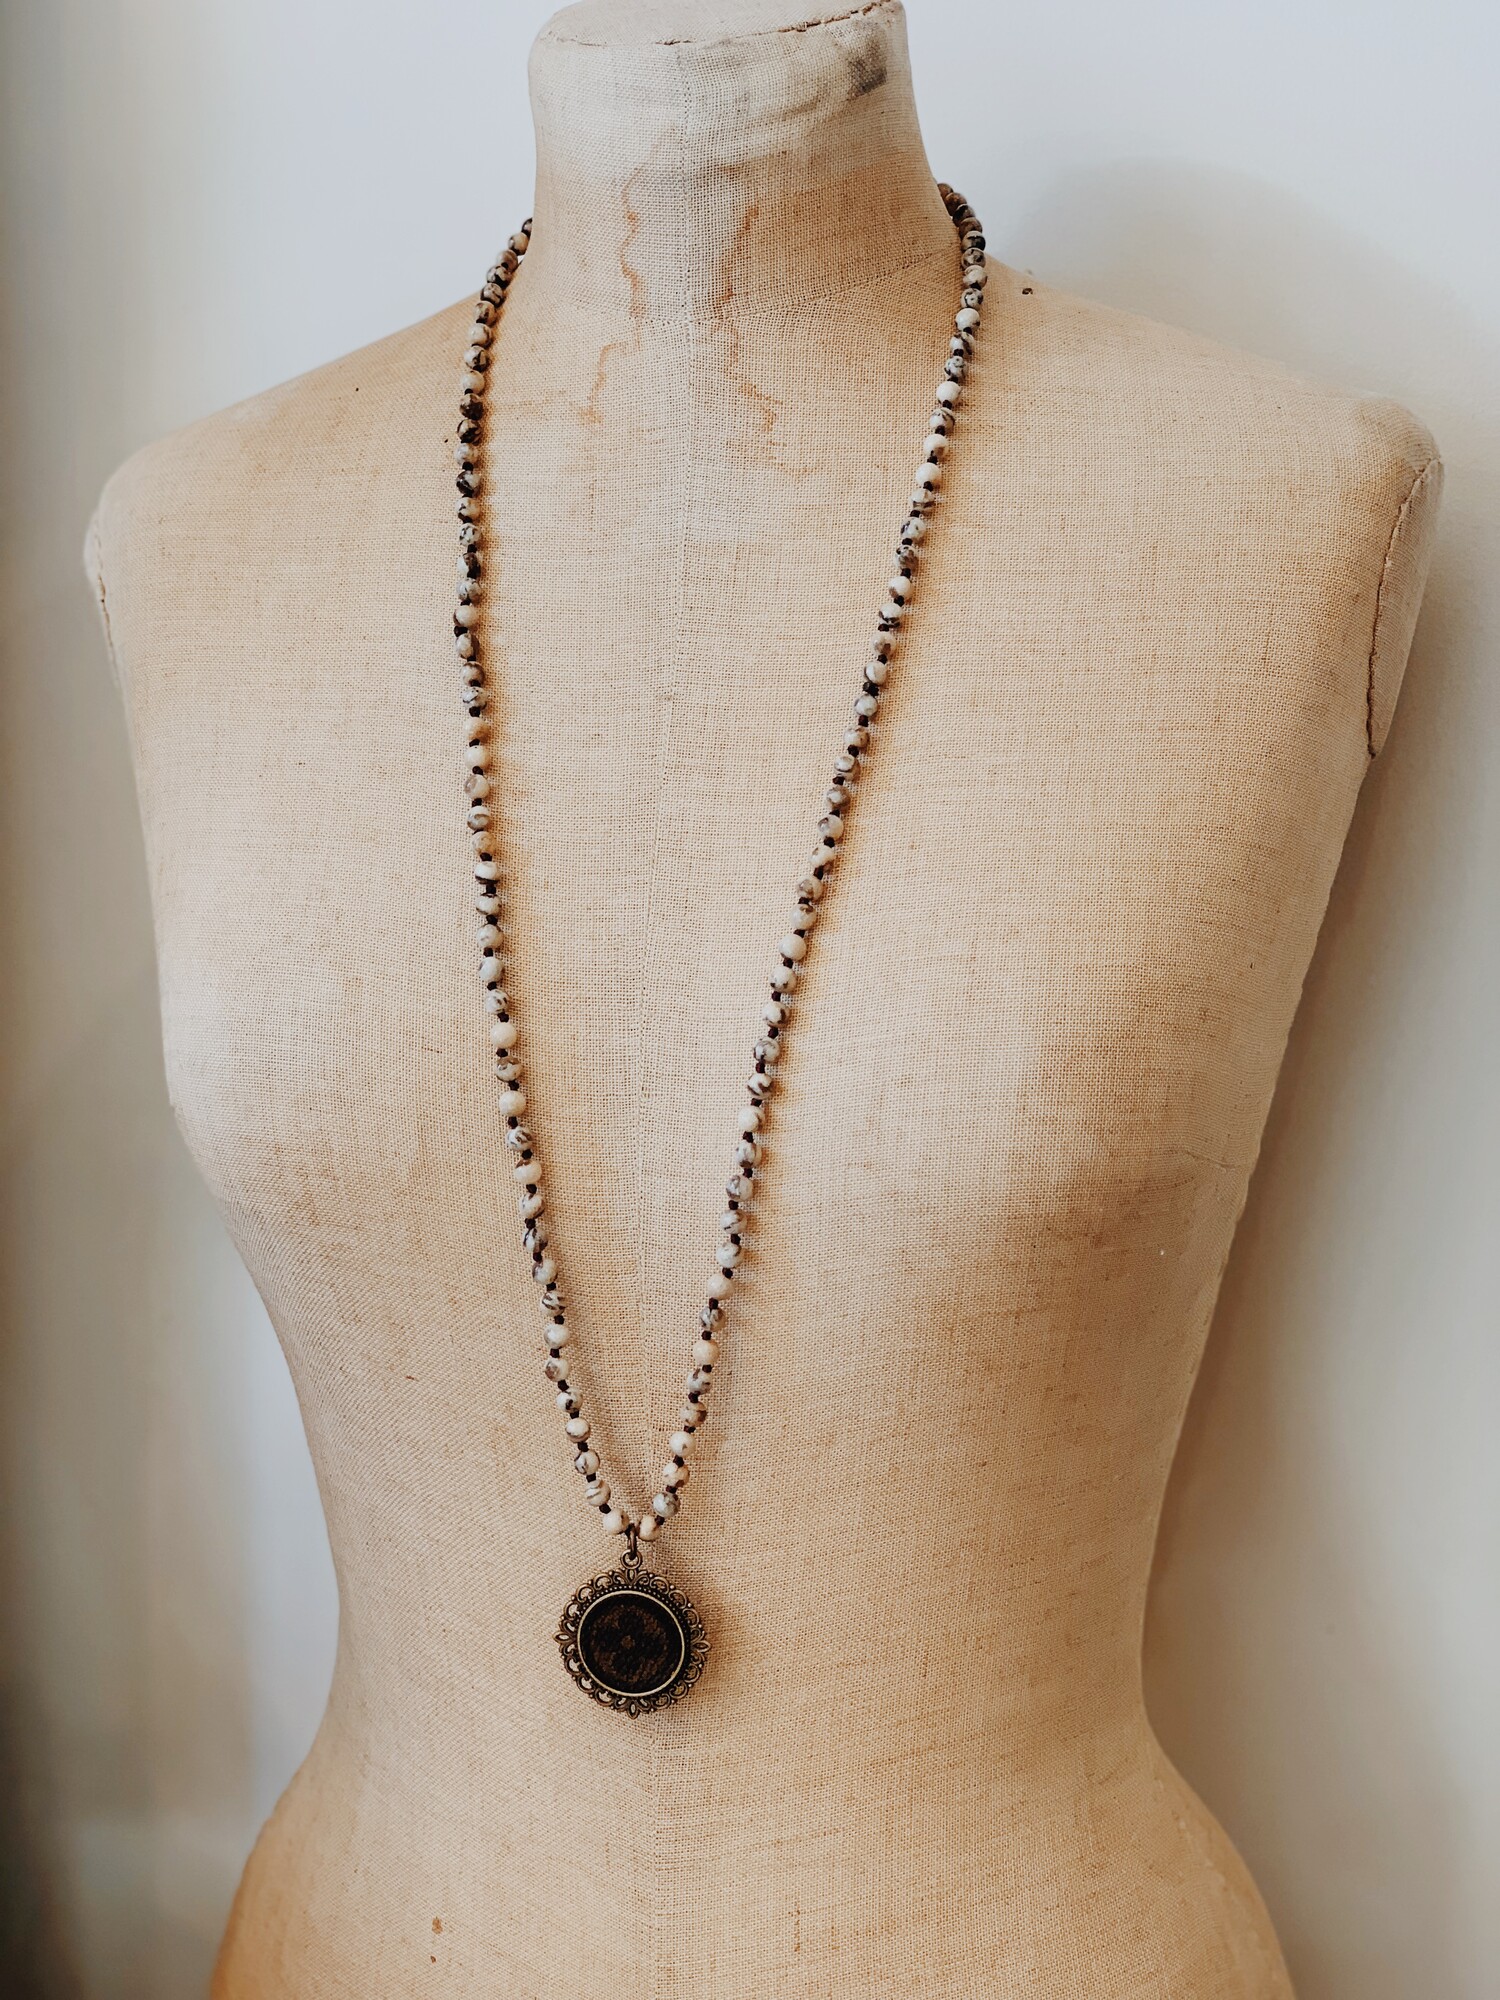 This upcycled, hand-made necklace was made from an authentic Louis Vuitton bag! The bag's date code is SP0927. See pictures for measurements.

Not affiliated with the LV company.